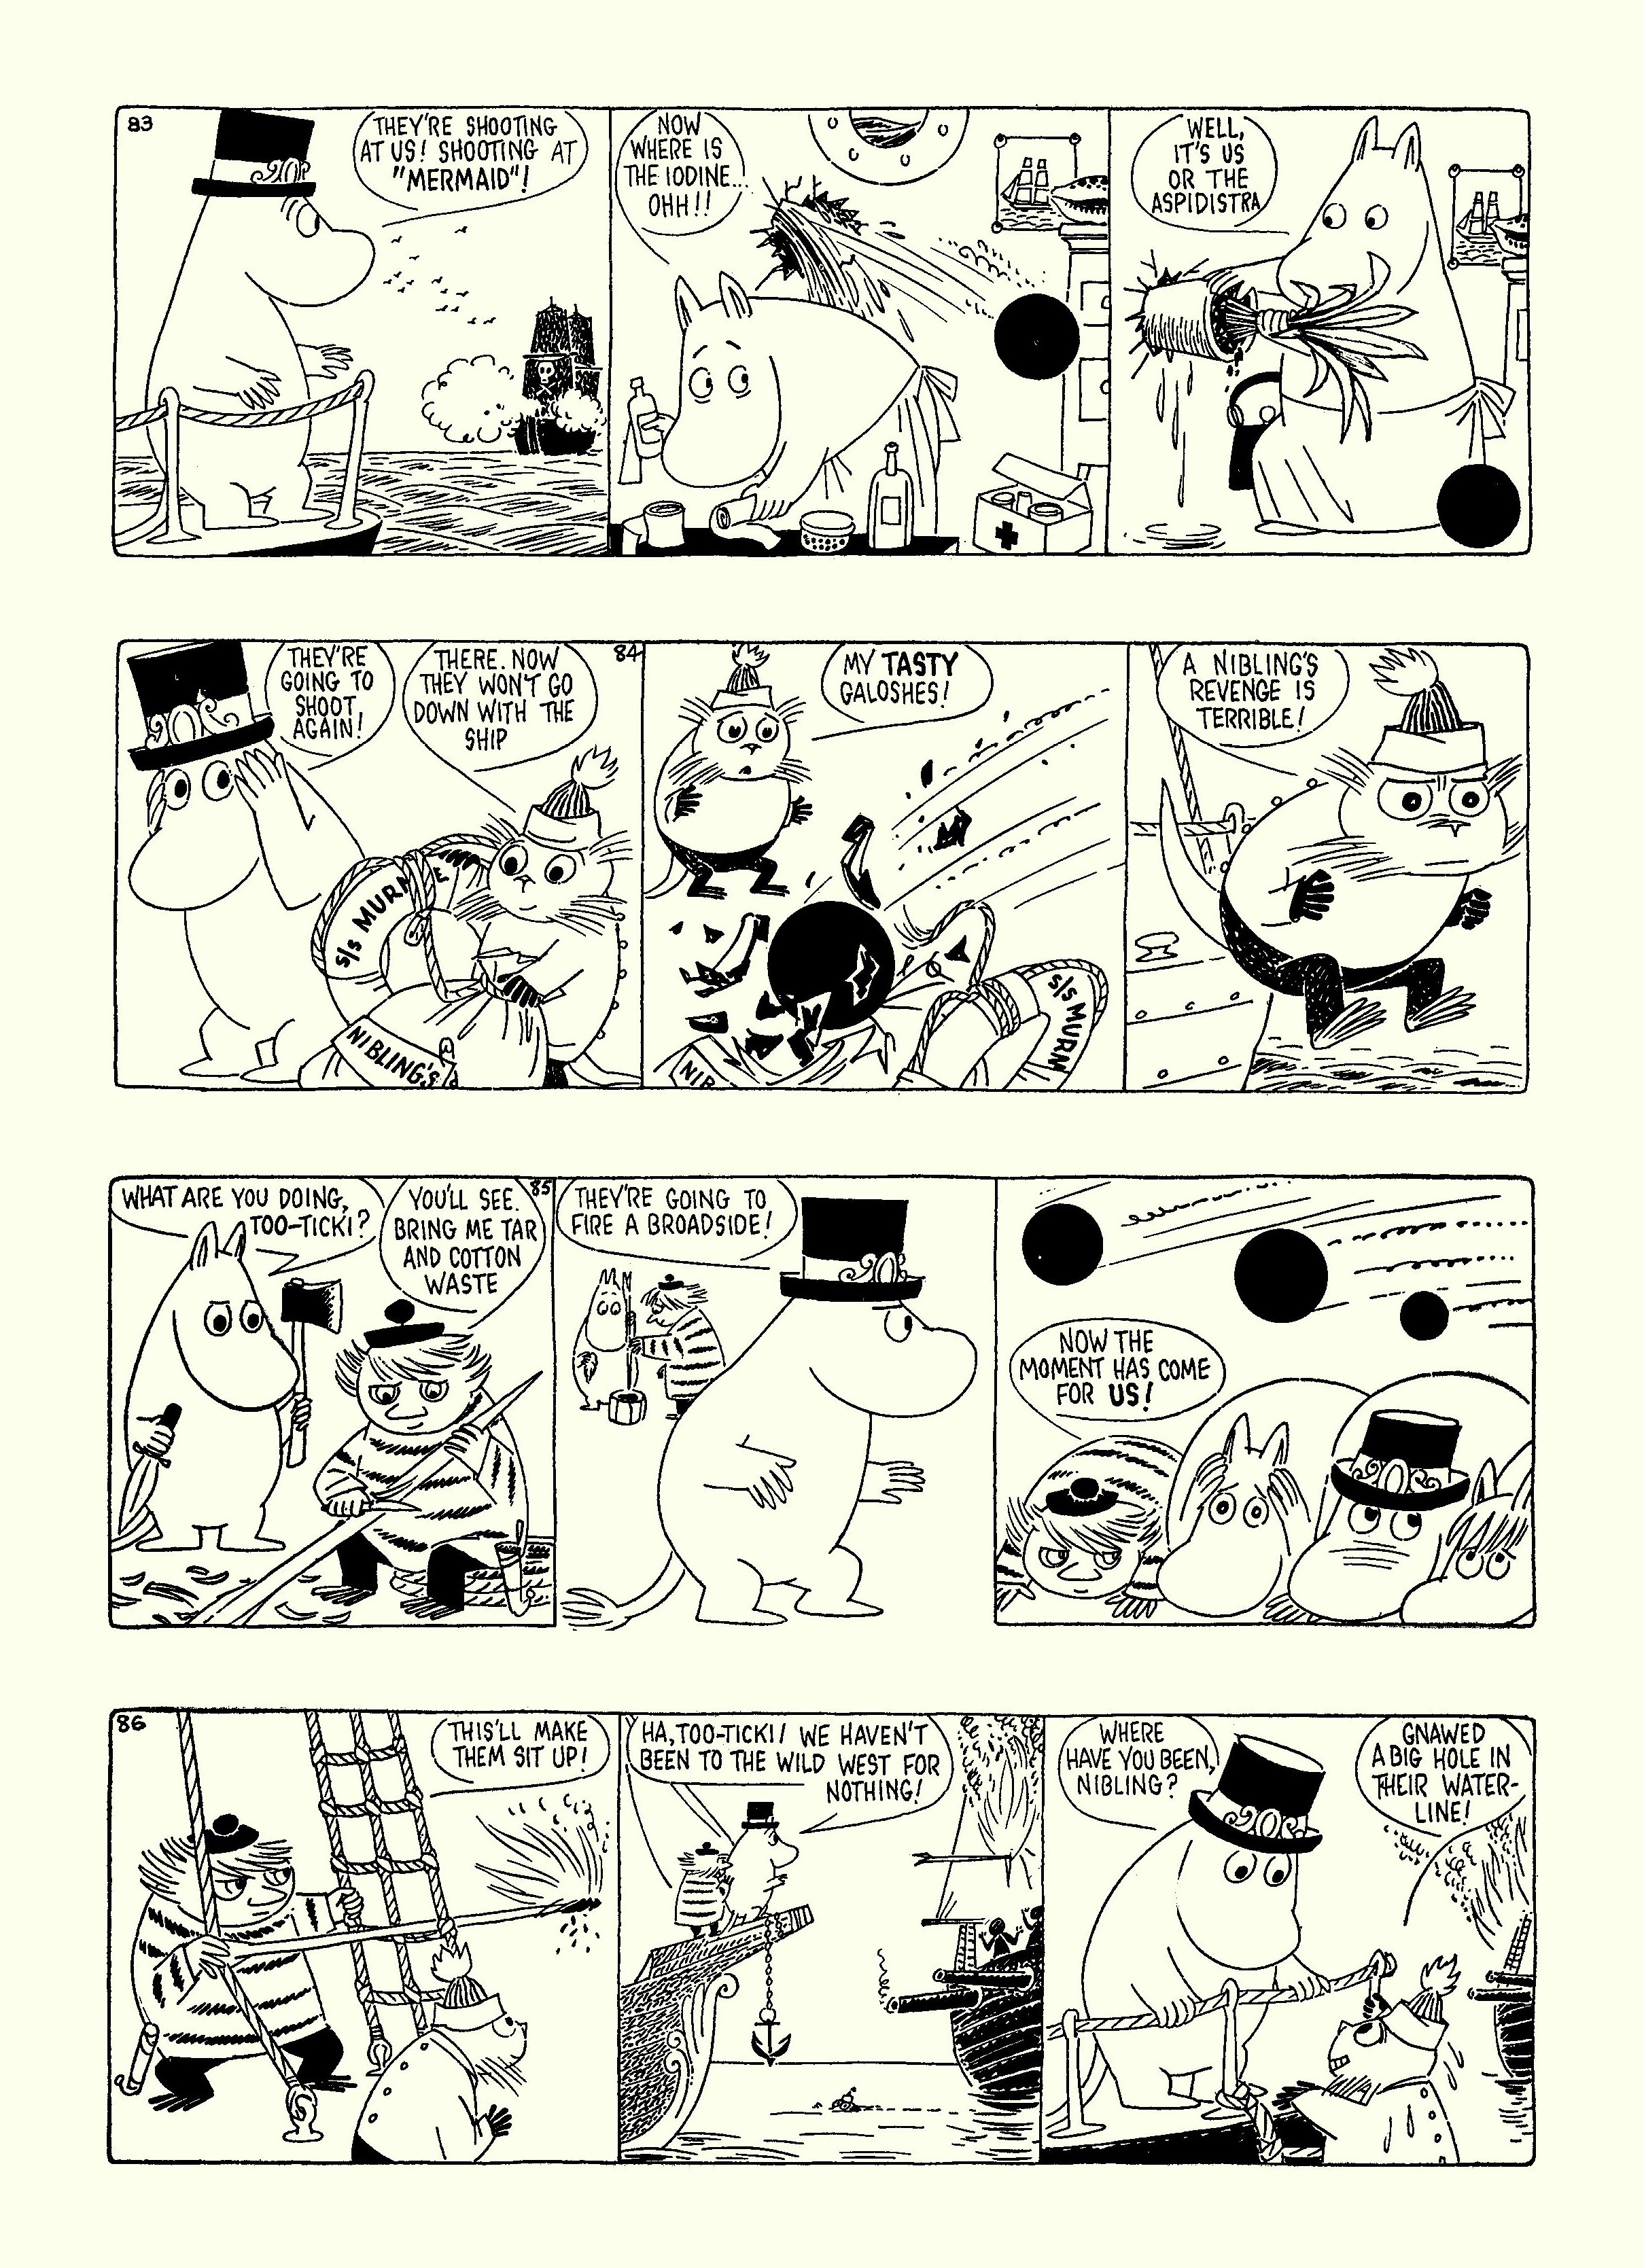 Read online Moomin: The Complete Tove Jansson Comic Strip comic -  Issue # TPB 5 - 52